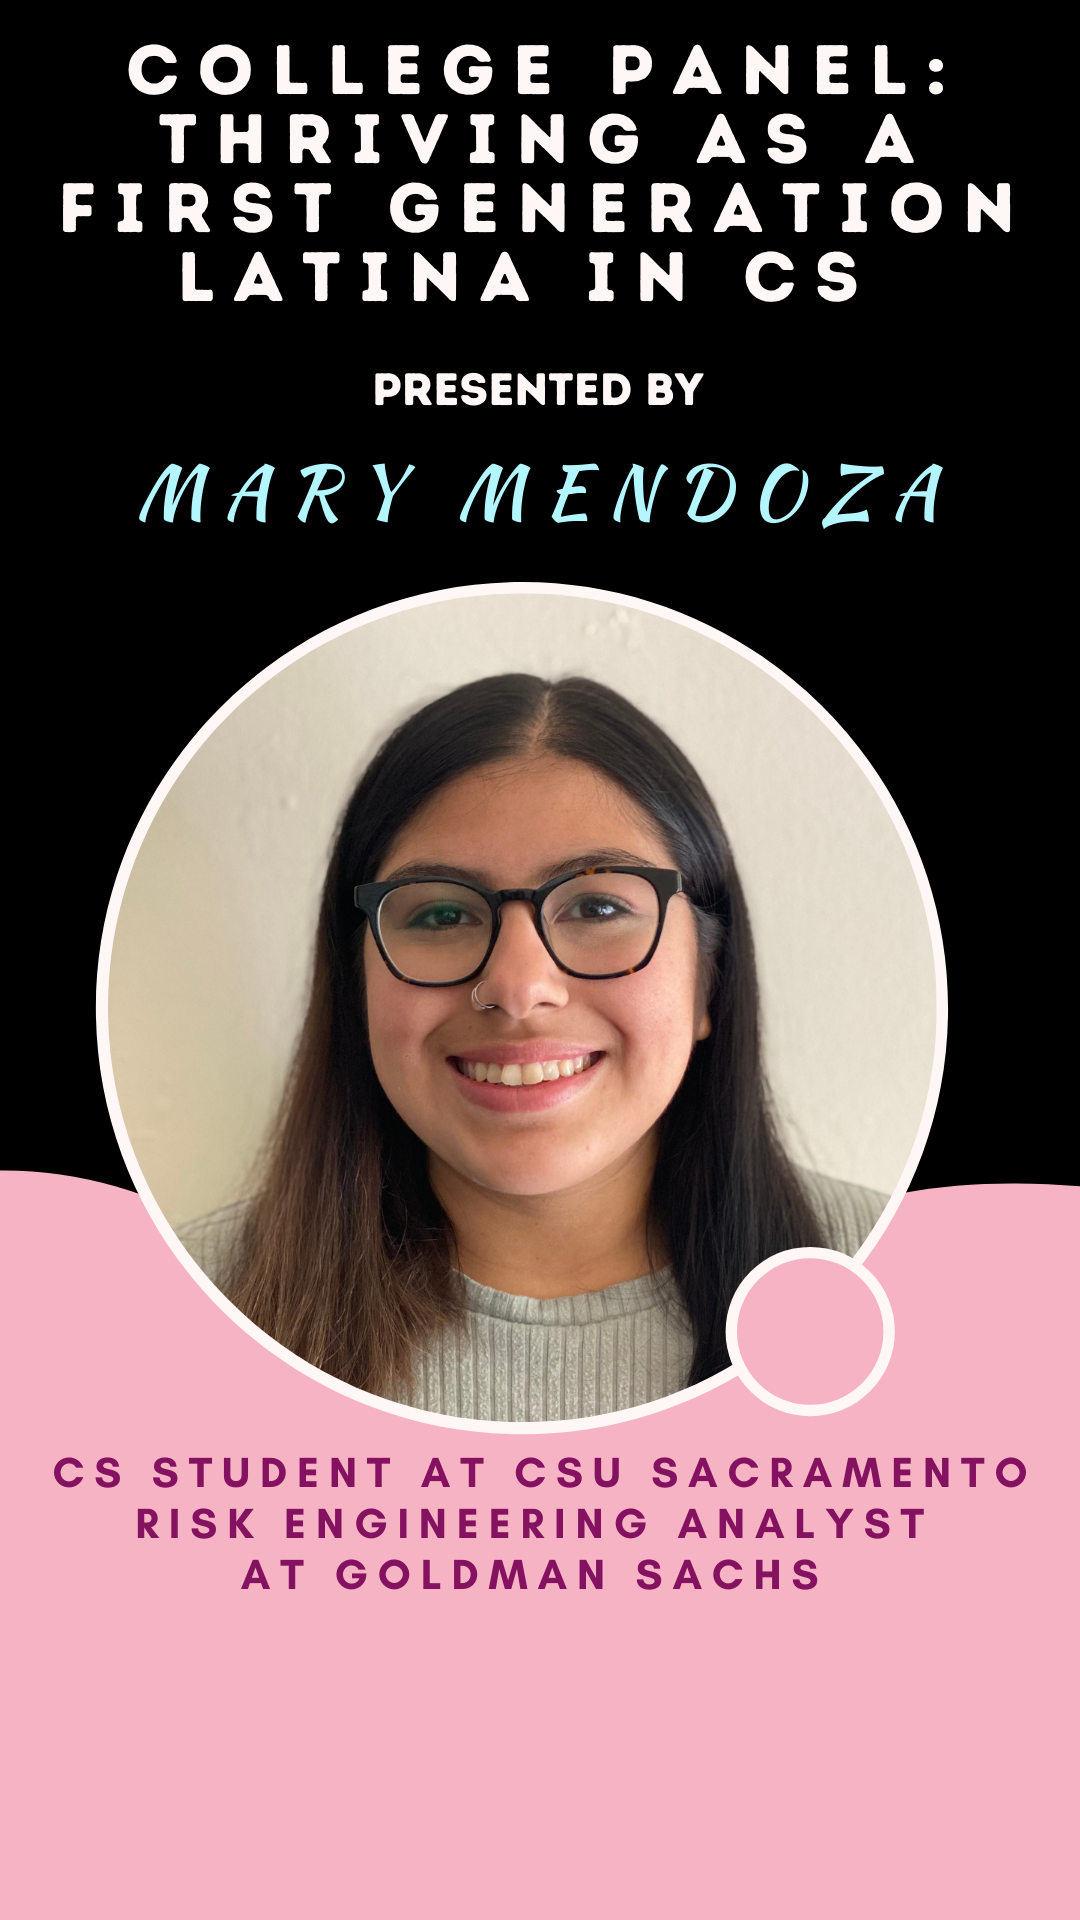 link to her talk "College Panel: Thriving as a first generation Latina in CS"